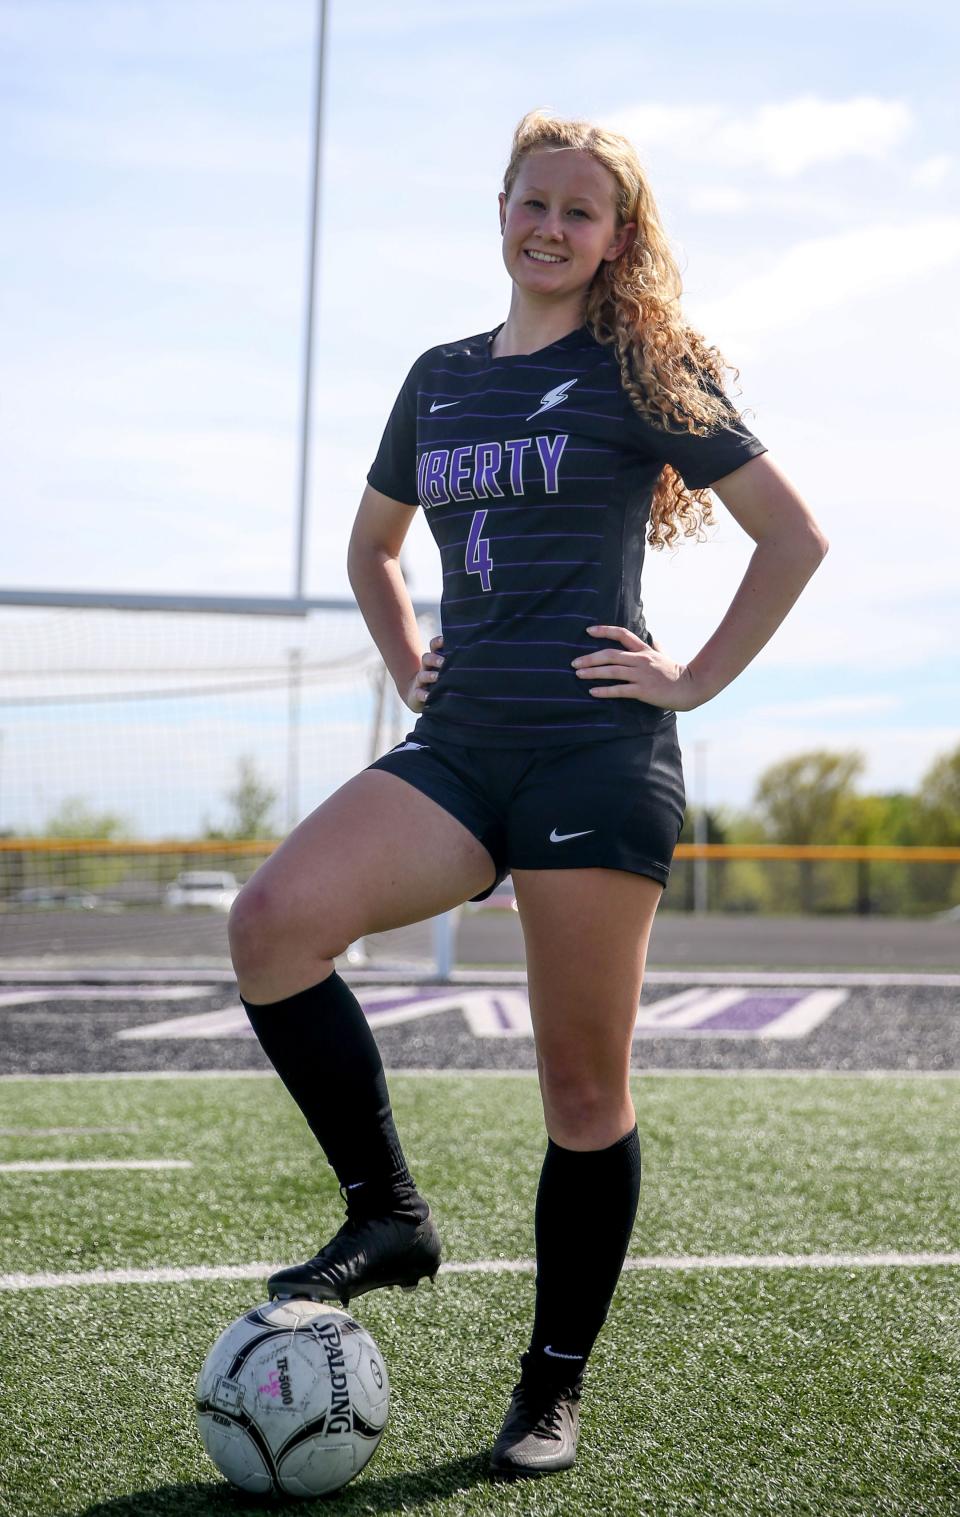 Rilyn Breinholt poses for a portrait at Liberty High School in North Liberty, Iowa.